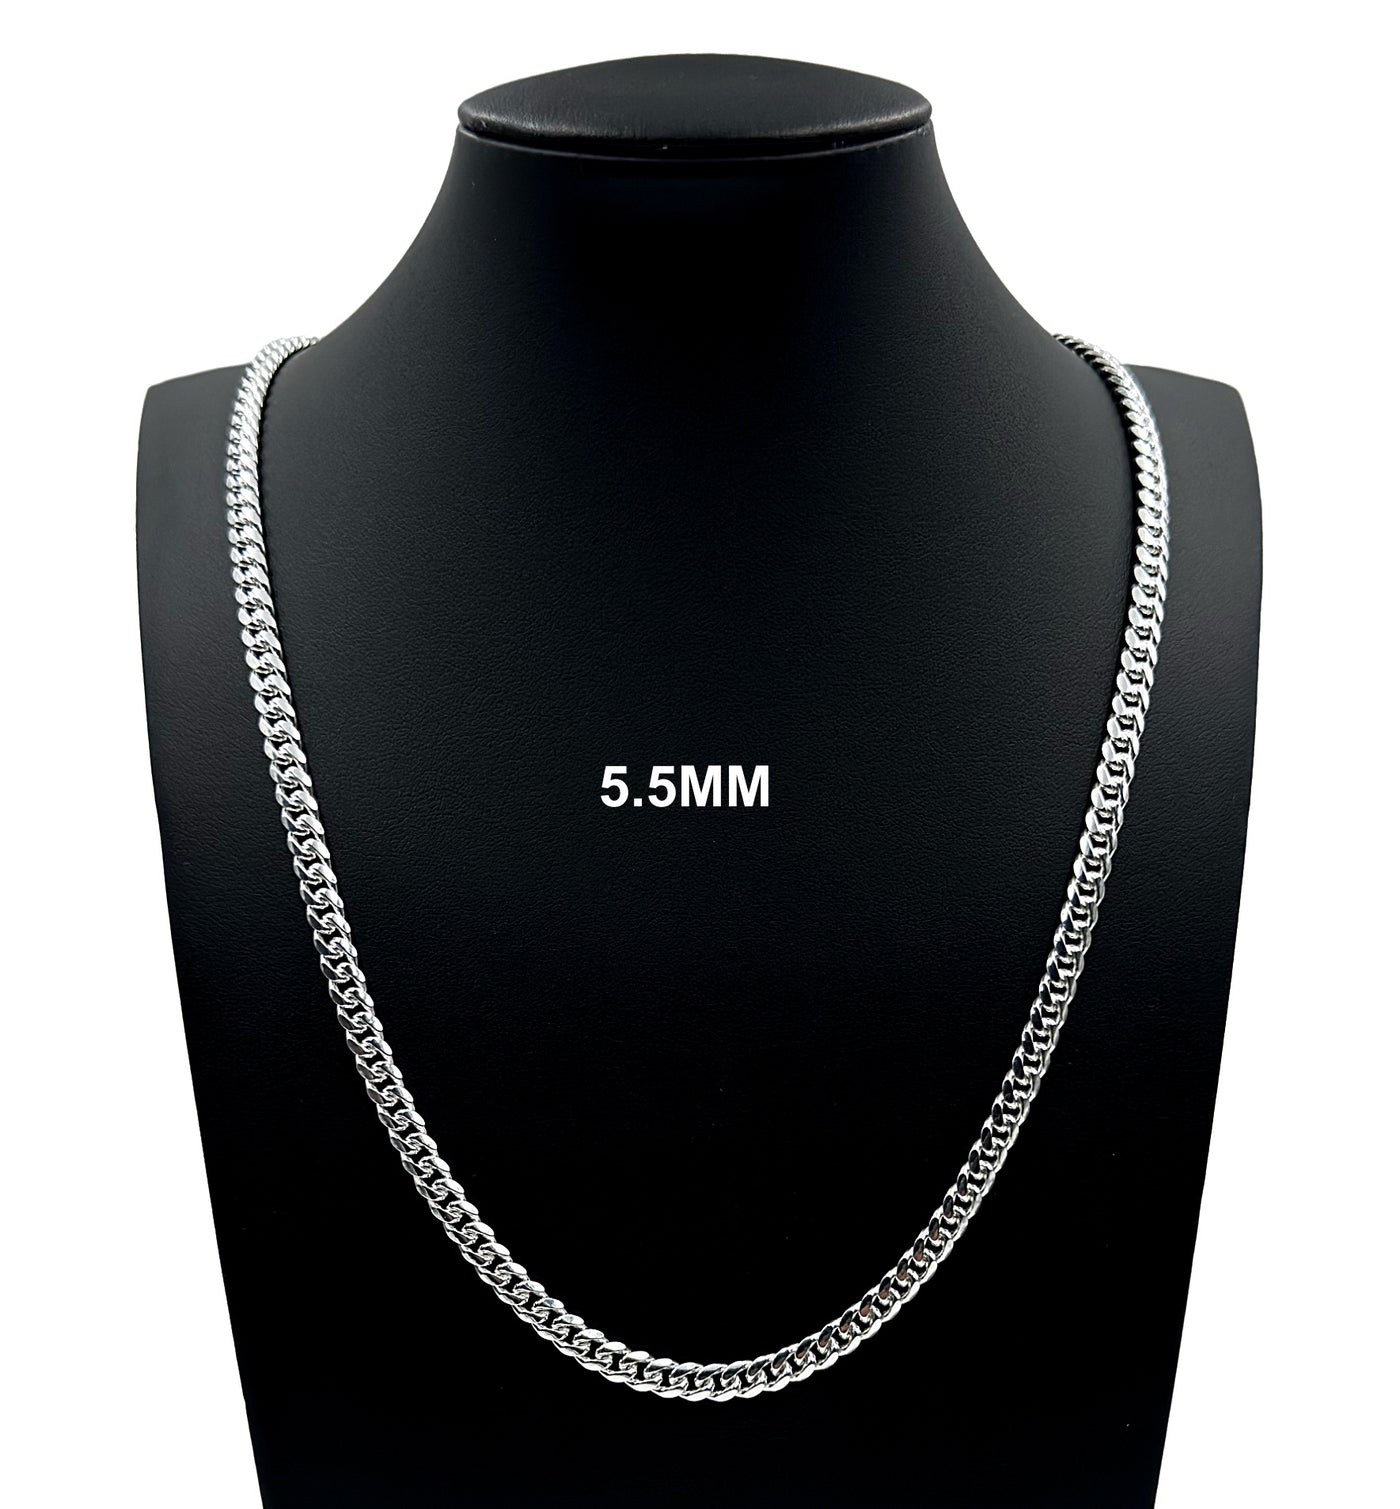 Real 5.5MM Solid 925 Sterling Silver Italian MIAMI CUBAN LINK CHAIN Necklace UNISEX